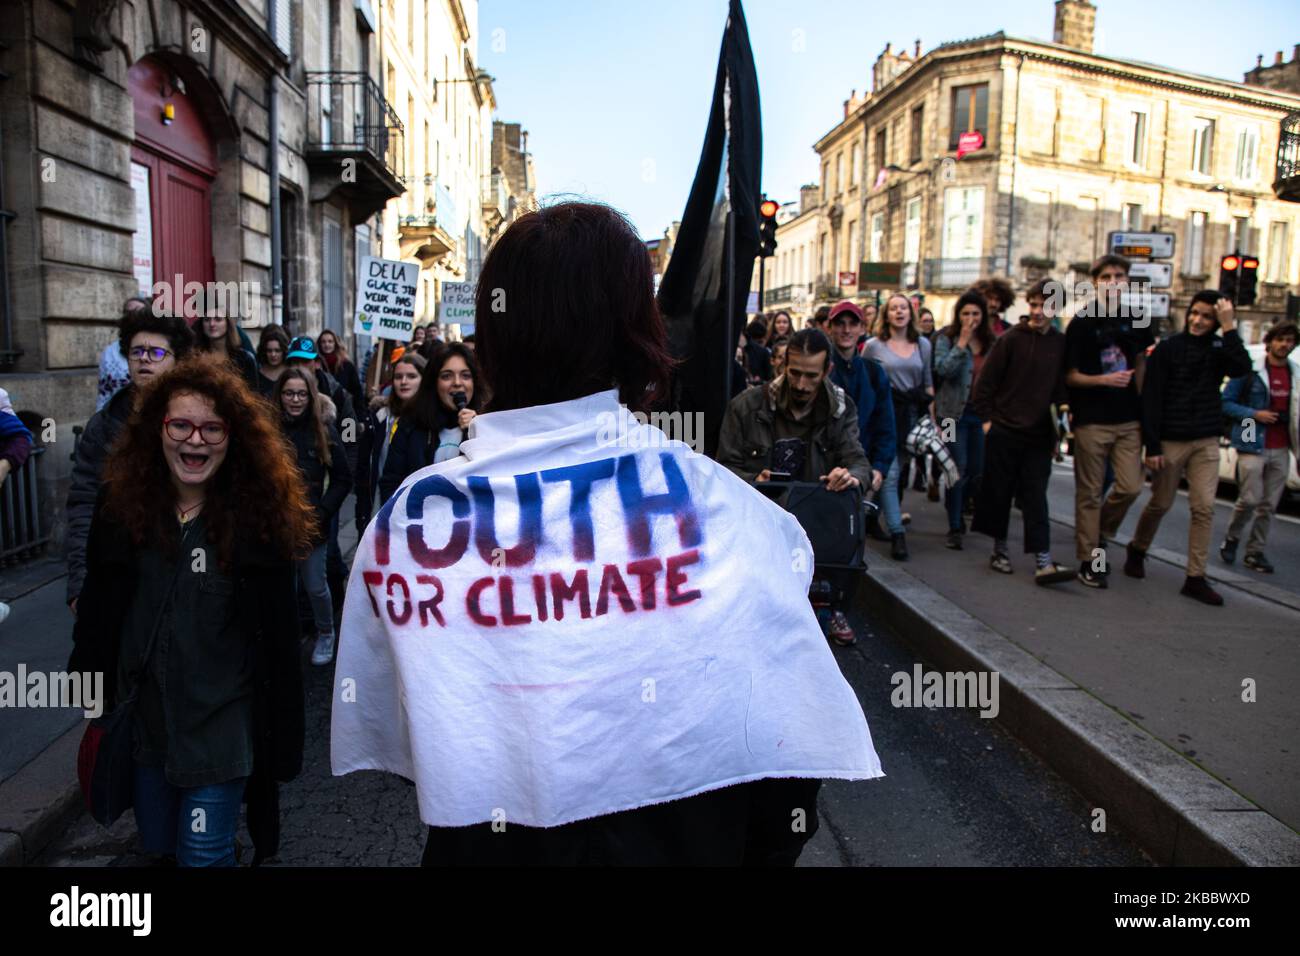 March against the black friday and for the climate in Bordeaux, France, on 29 November 2019. Block friday against black friday makes actions in Bordeaux in France, starting by a march with the march for the climate, some activist sit and block the stores galeries lafayette and the apple store tin the center of Bordeaux, by the associations of youth for the climate, extinction rebellion, and AnvCop21, some activist sit in the apple store before the police get them out. (Photo by Jerome Gilles/NurPhoto) Stock Photo